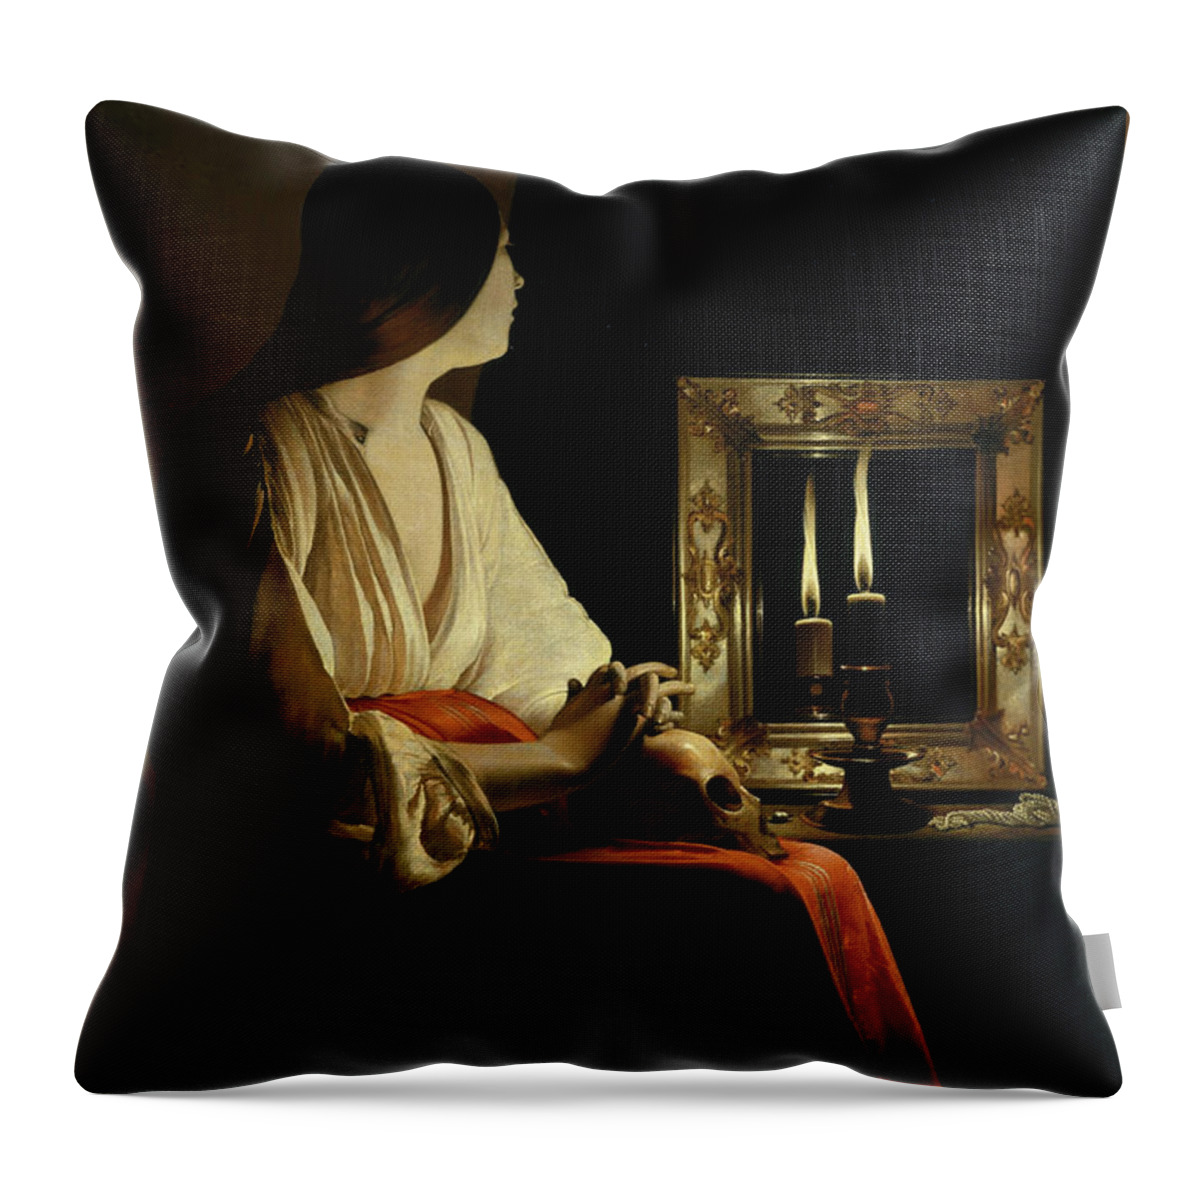 17th Century Throw Pillow featuring the painting The Penitent Magdalen, circa 1640 by Georges de La Tour